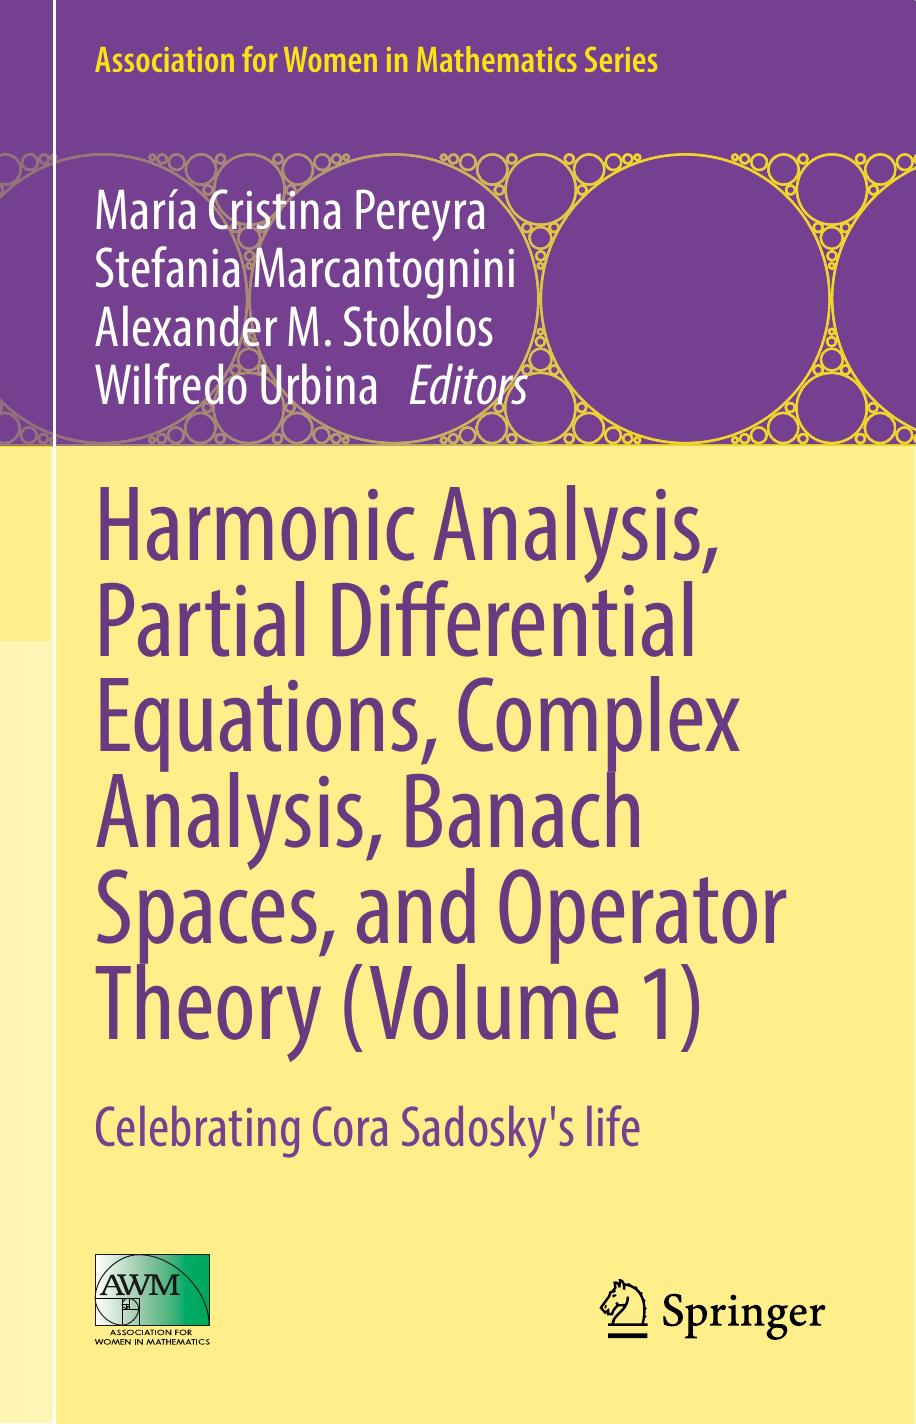 Harmonic Analysis, Partial Differential Equations, Complex Analysis, Banach Spaces, and Operator Theory (Volume 1)  Celebrating Cora Sadosky's life 2016